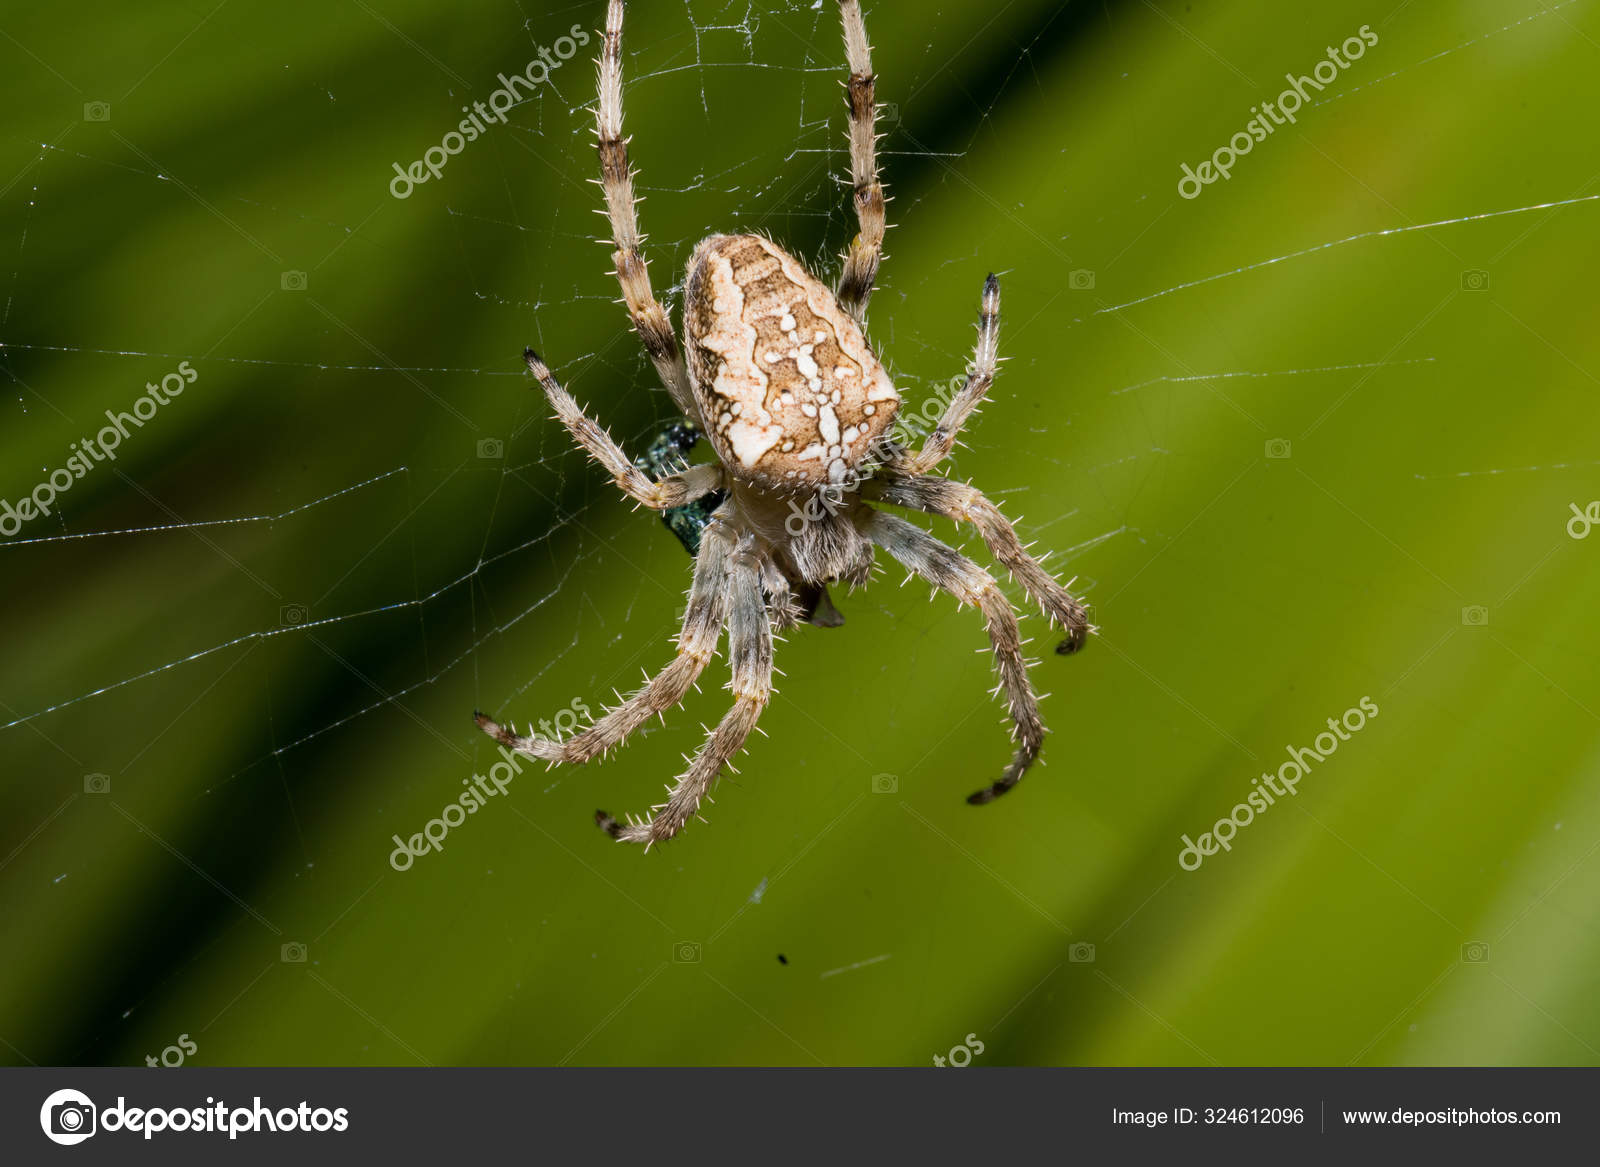 A Large White Spider In The Home Garden Stock Photo